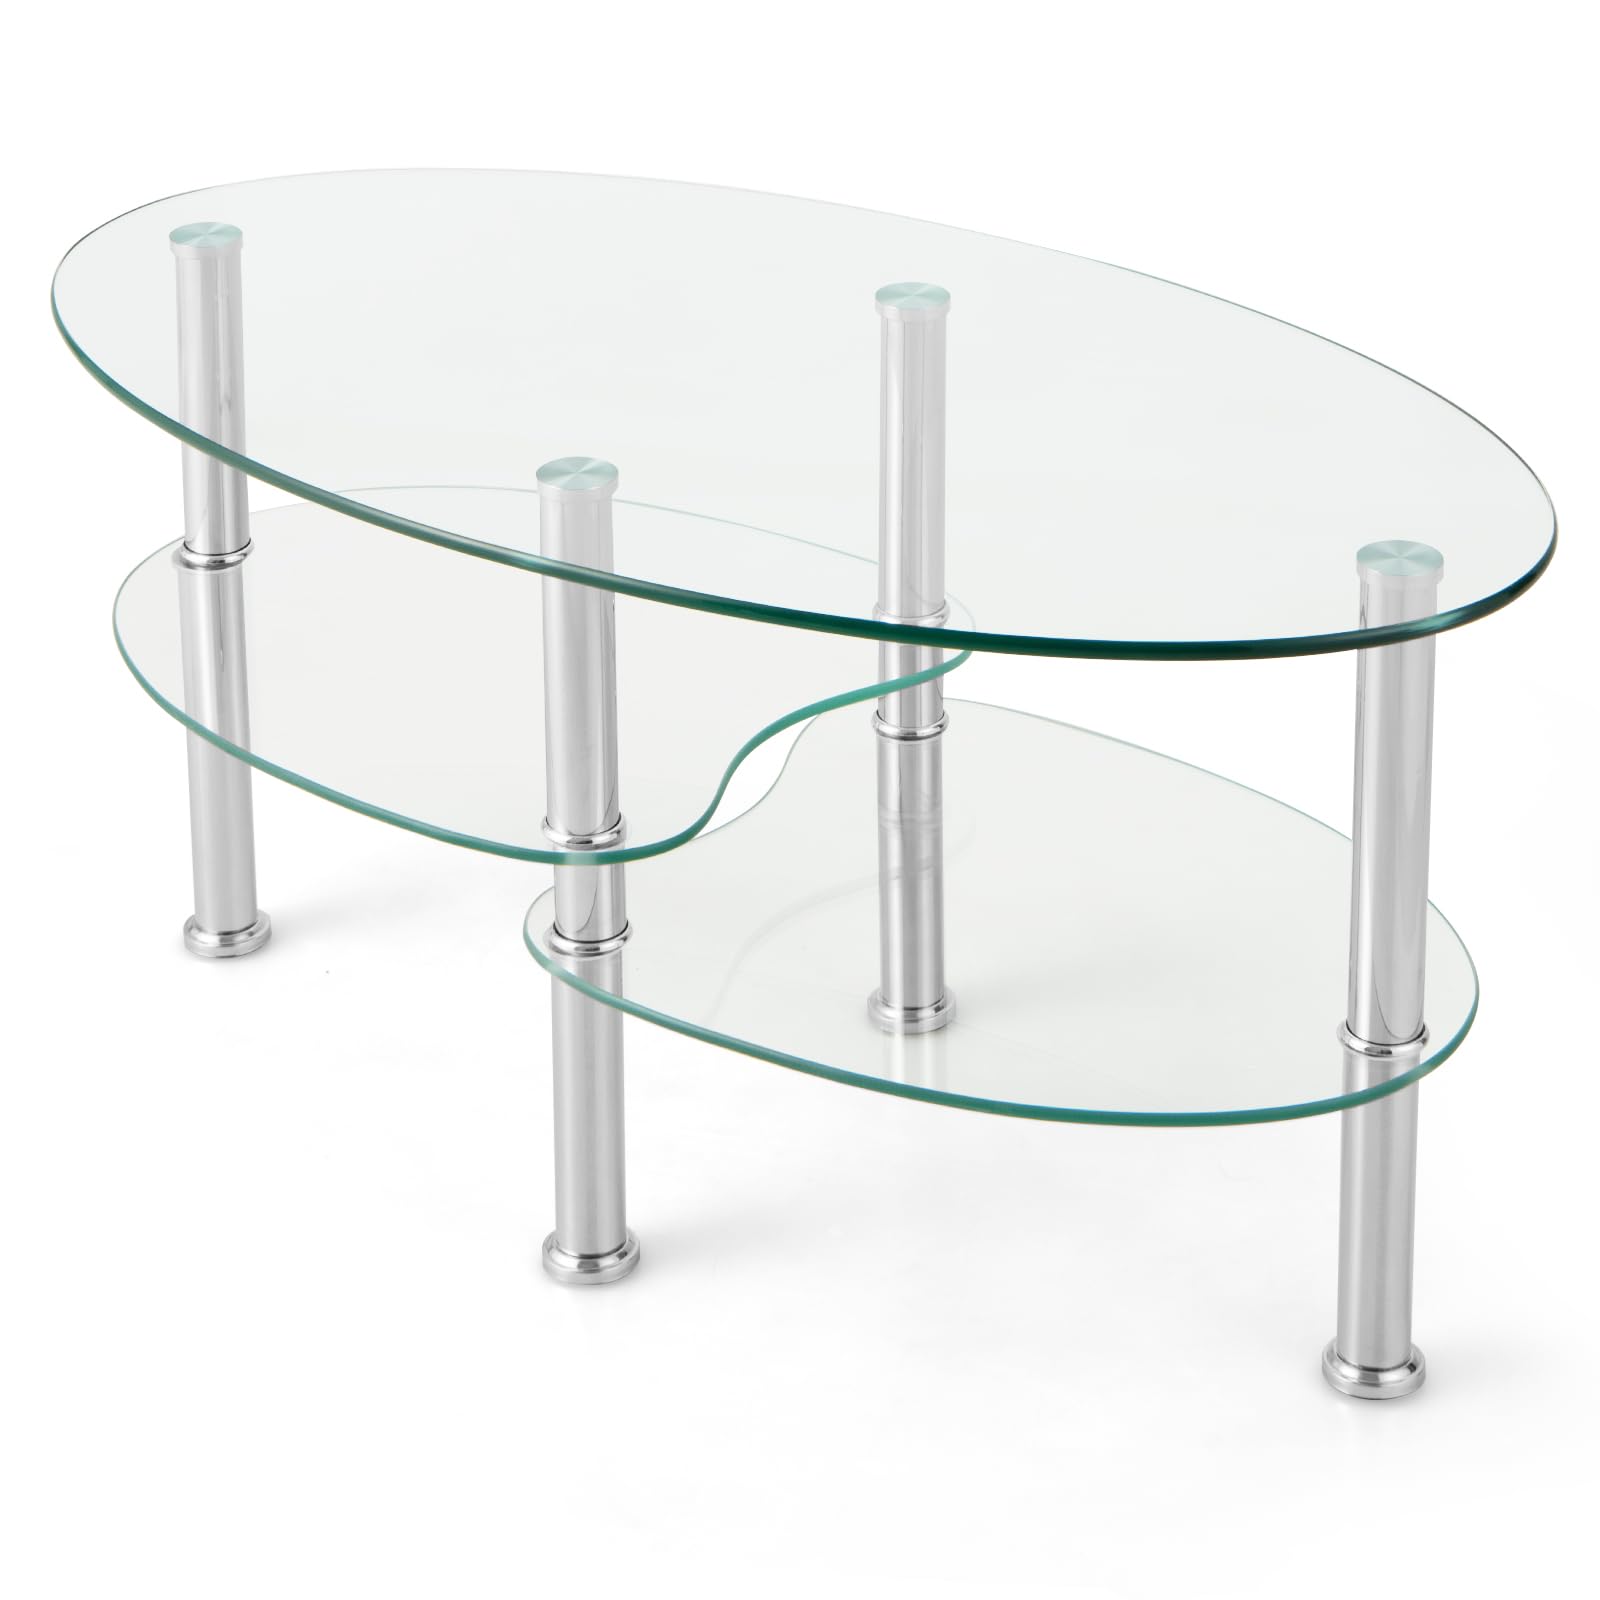 Giantex Oval Glass Coffee Table - 3-Tier Transparent Tempered Glass Center Table with Metal Stand, 35"× 20" ×18"